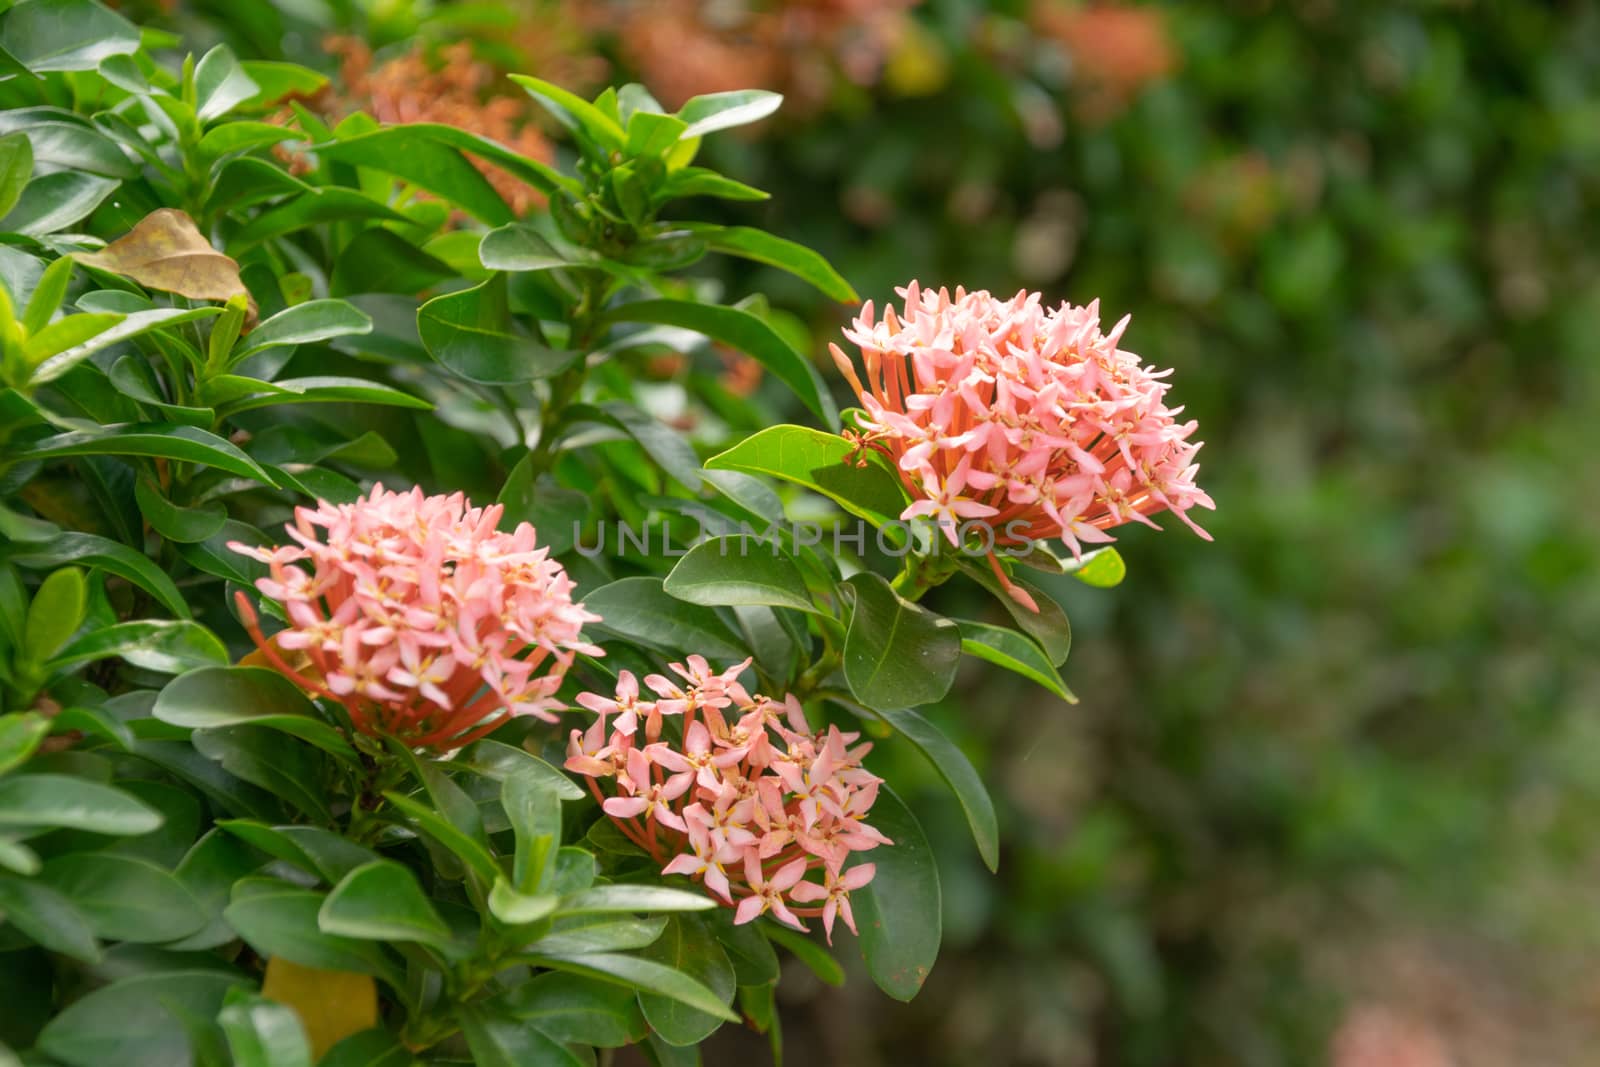 Ixora flowers in the garden by Banglade